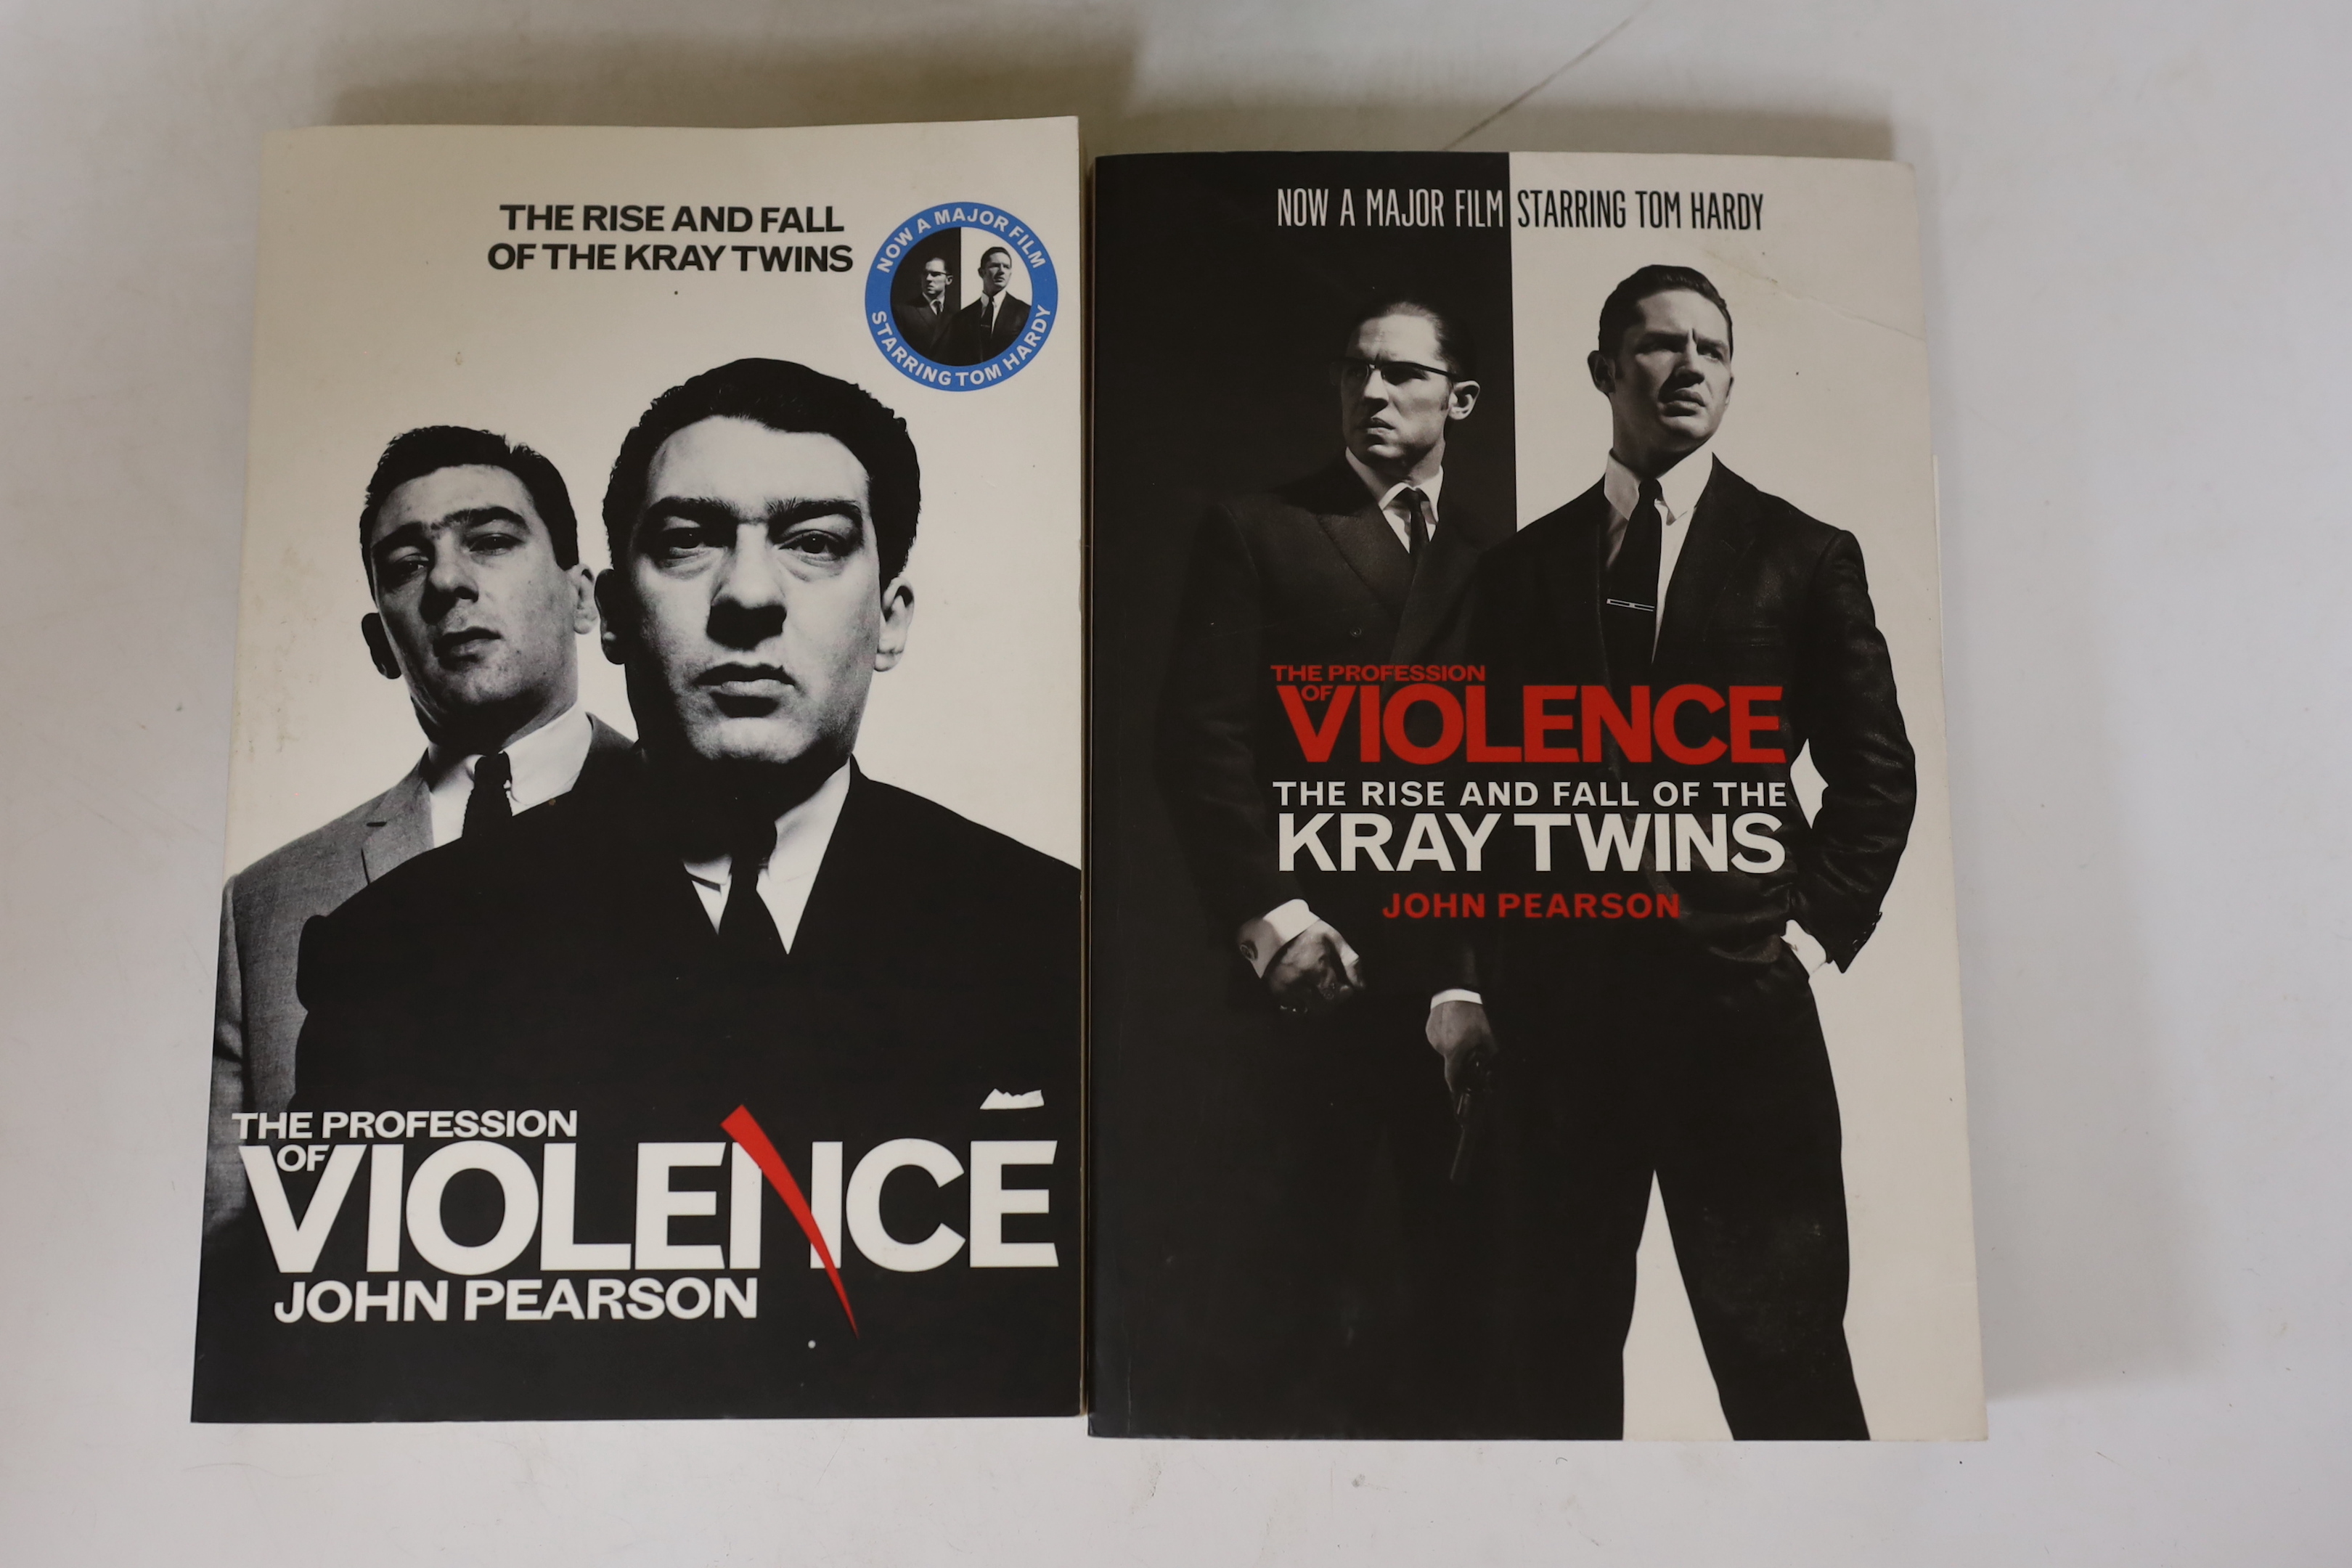 Pearson, John - The Profession of Violence: the rise and fall of the Kray Twins. First Edition.